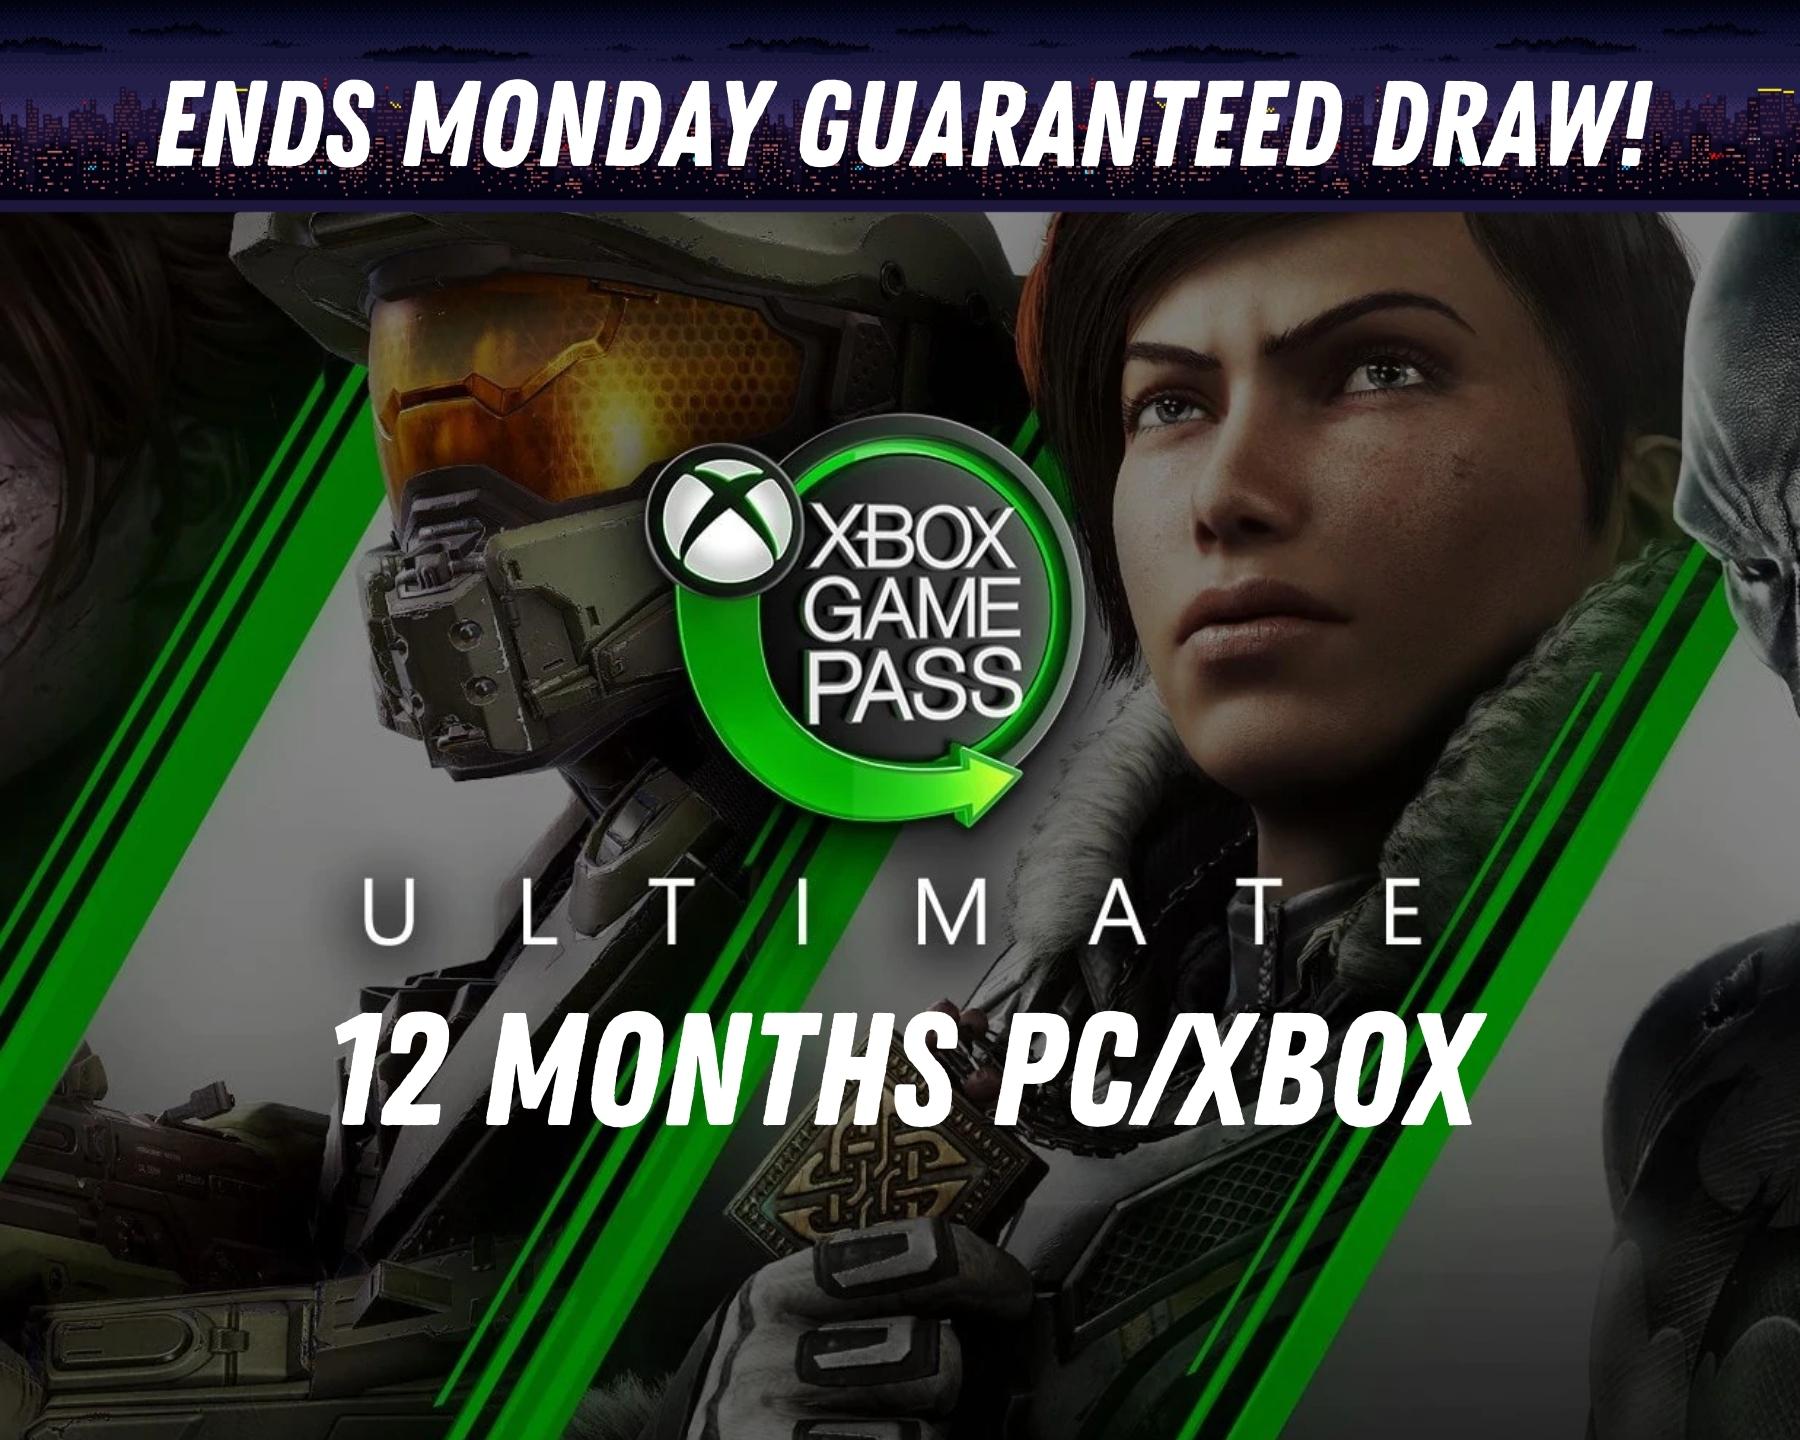 Win 12 months XBOX Game Pass Ultimate for XBOX / PC! With CompCity Giveaways!